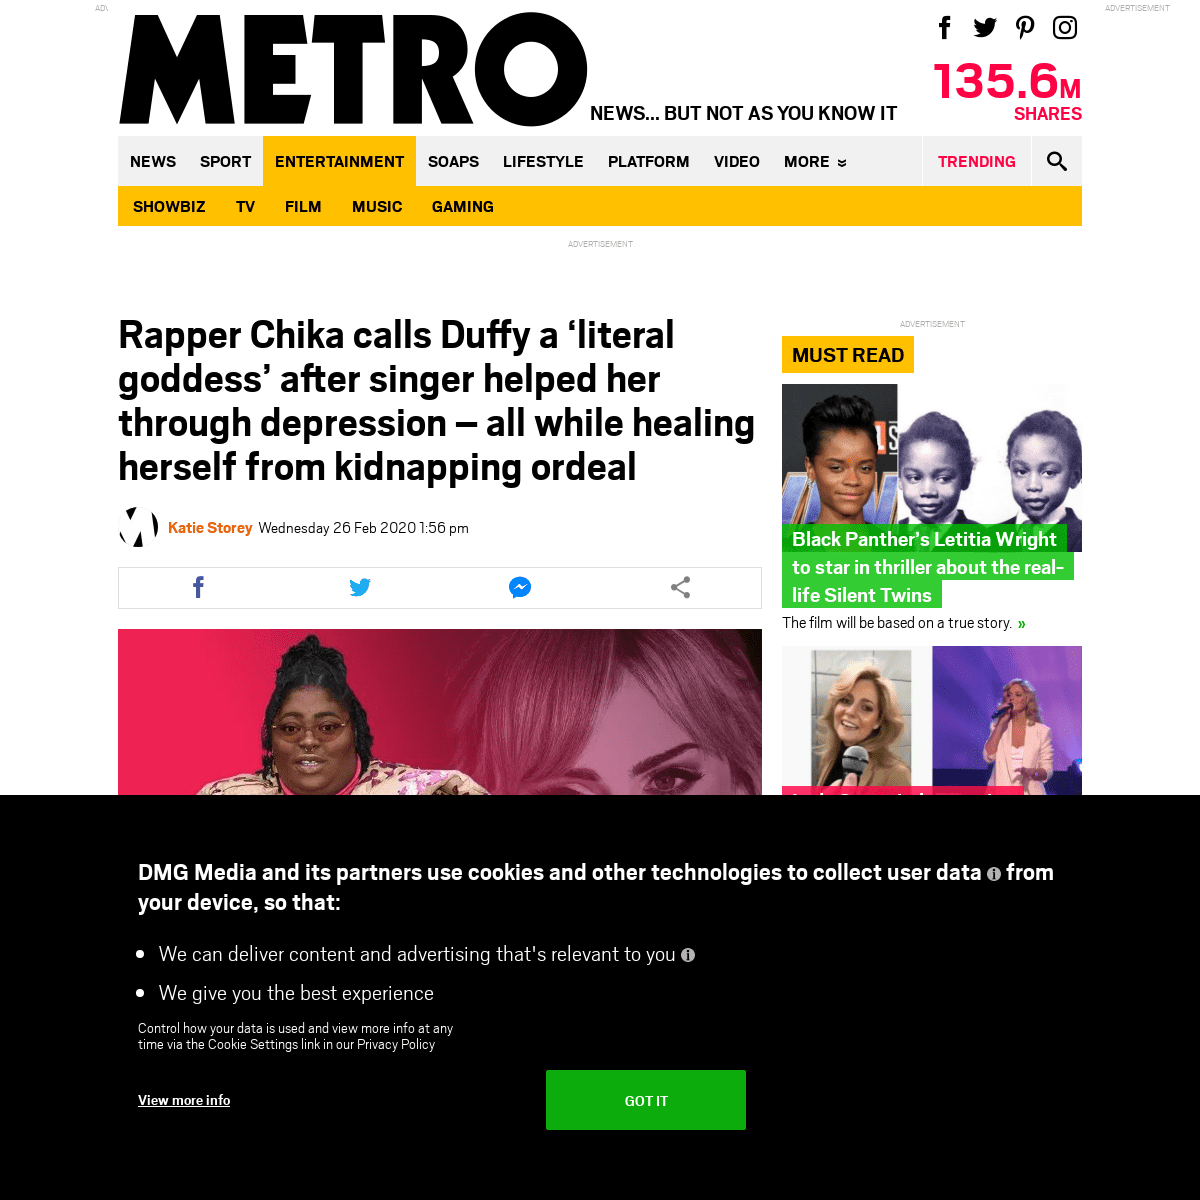 A complete backup of metro.co.uk/2020/02/26/rapper-chika-calls-duffy-literal-goddess-singer-helped-depression-healing-kidnapping